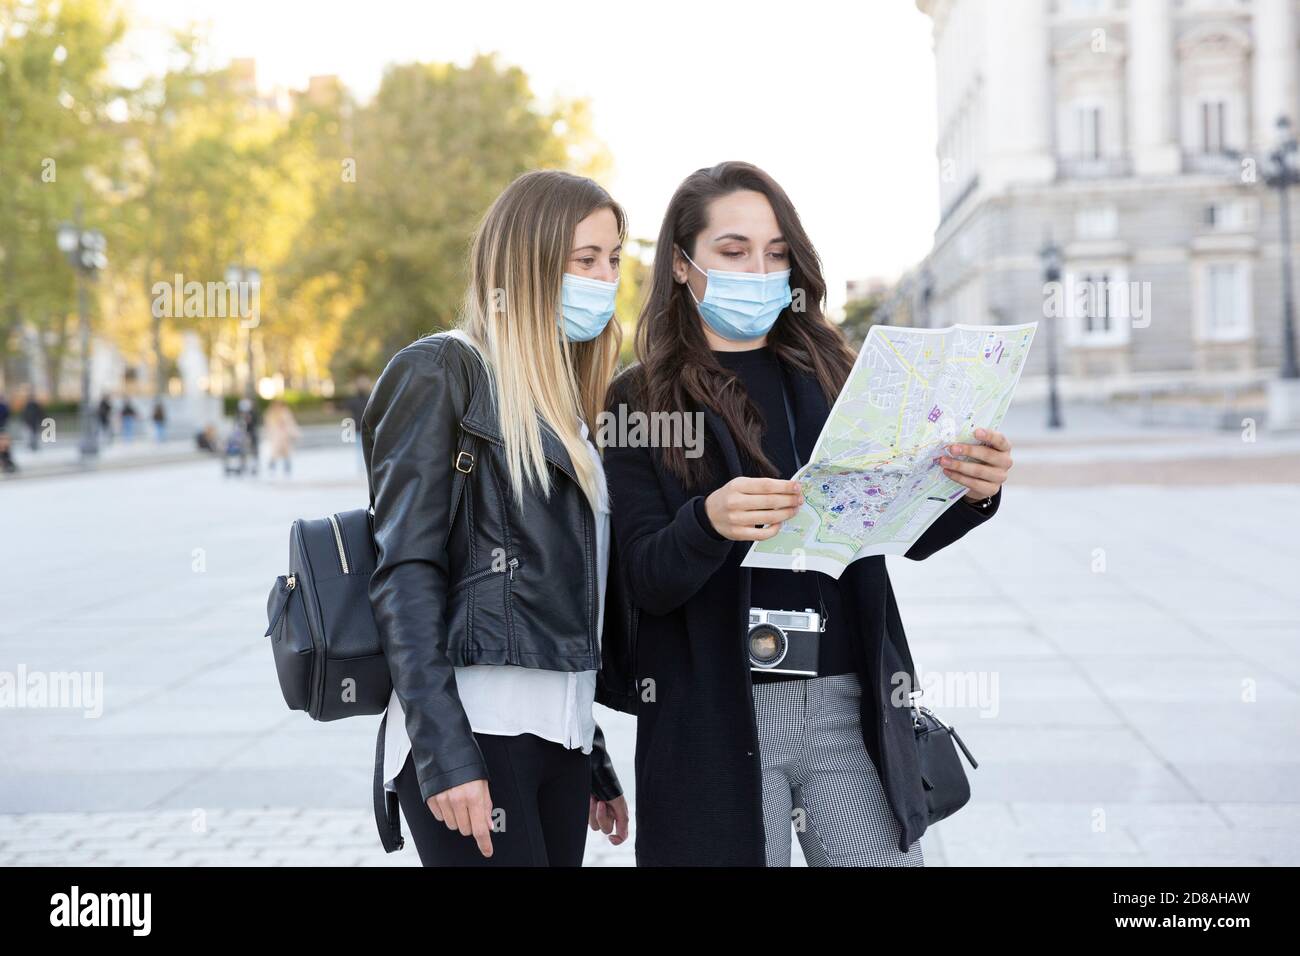 Two girl friends standing in the city looking at a tourist map. They are wearing face masks. Concept of new normal. Stock Photo